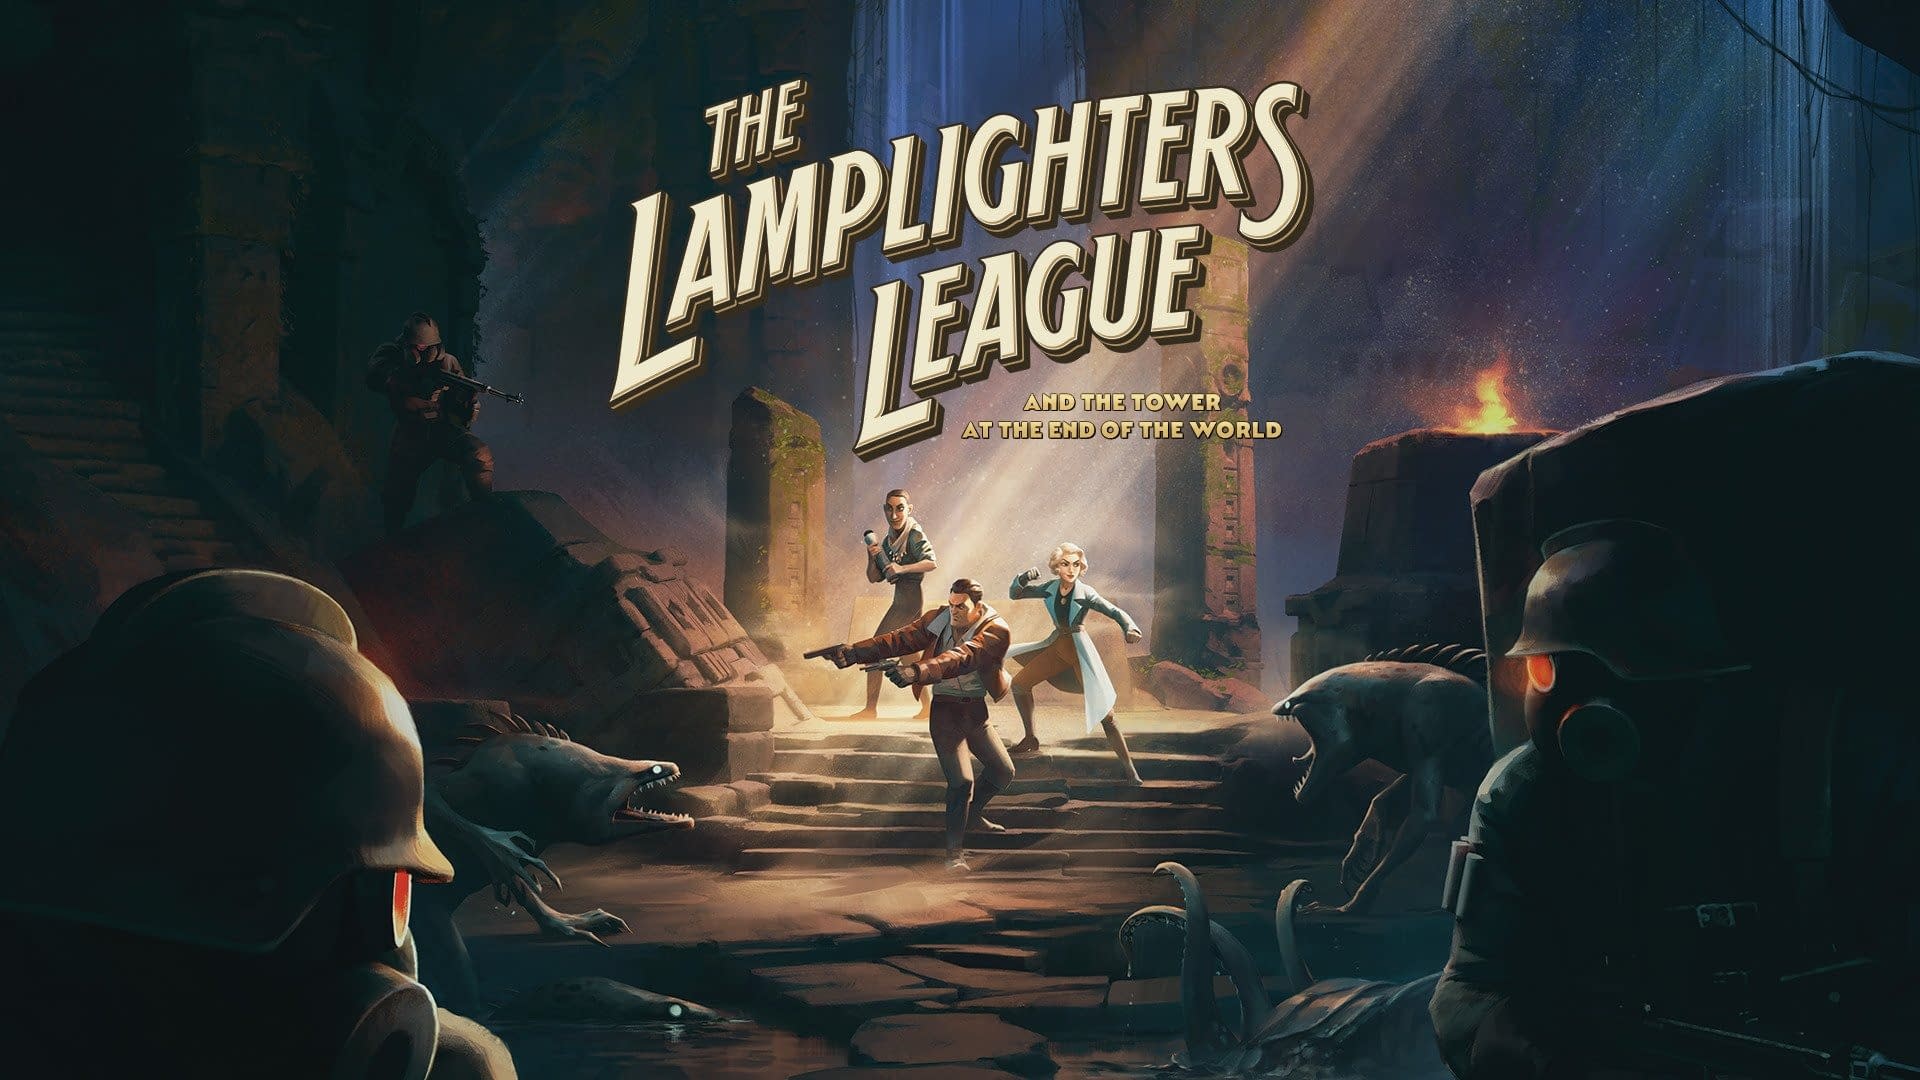 Paradox Interactive announces the form-based strategy game The Lamplighters League